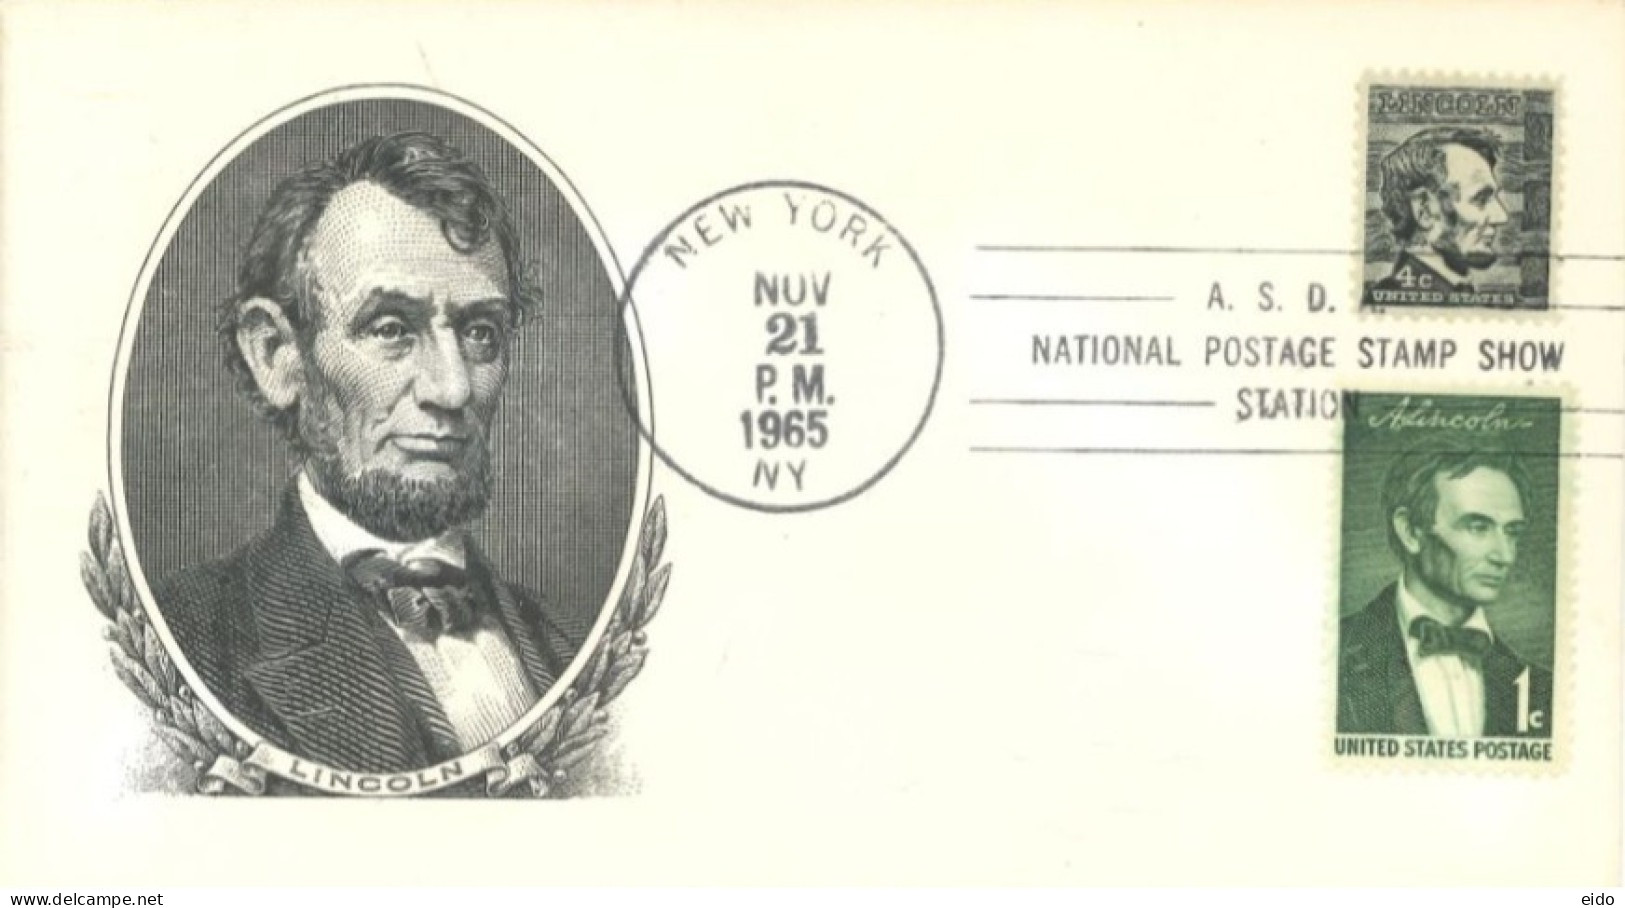 U.S.A.. -1965 -  SPECIAL STAMPS COVER  OF LINCOLN, AT NATIONAL POSTAGE STAMP SHOW STATION , NEW YORK - Covers & Documents